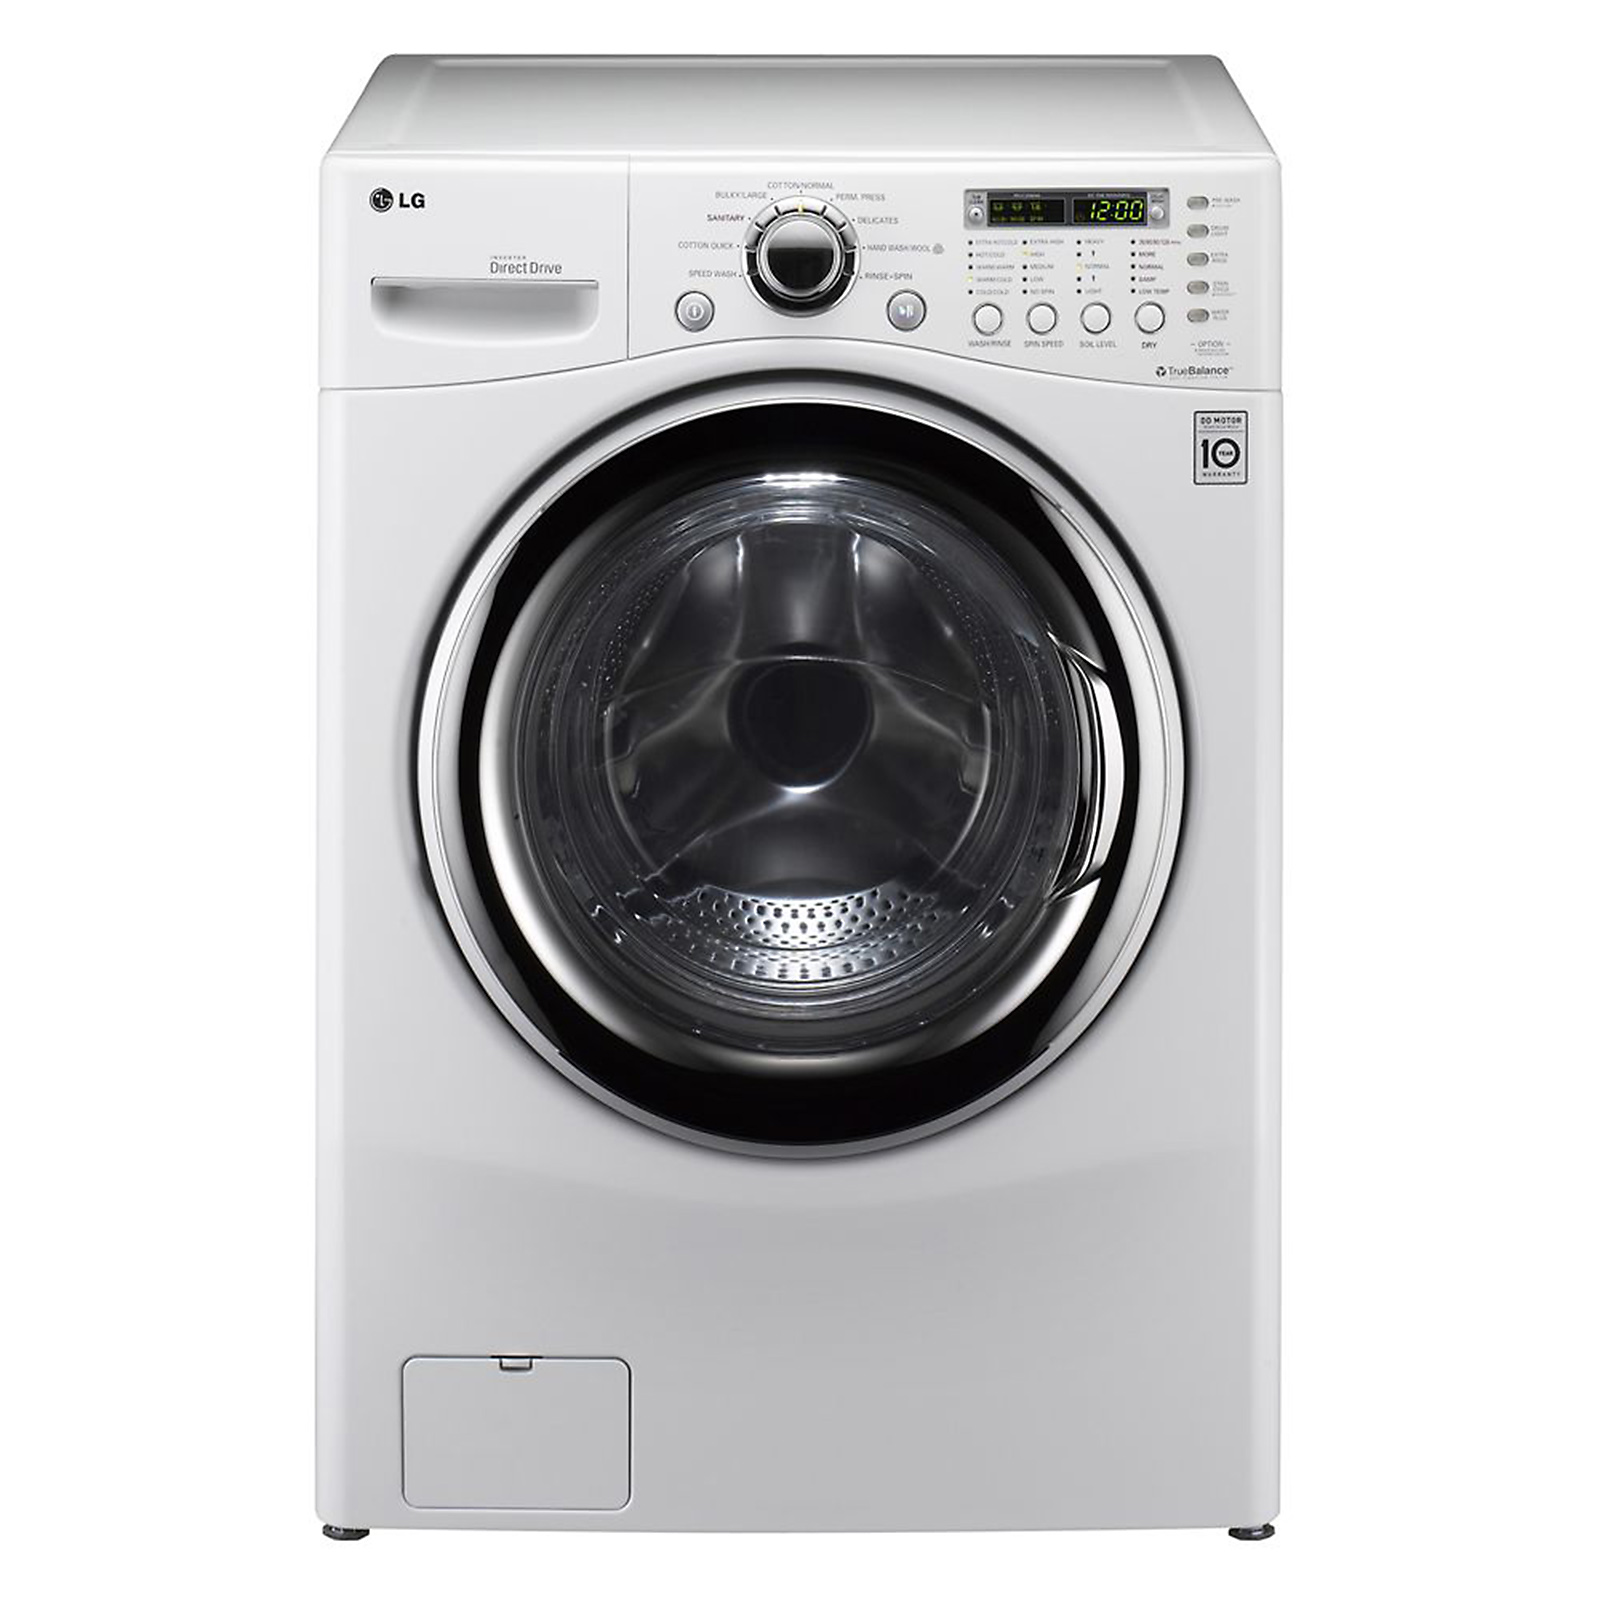 LG All In One Washer and Dryer 3.6 cu. ft. WM3987HW - Sears Lg All In One Washer Dryer Reviews